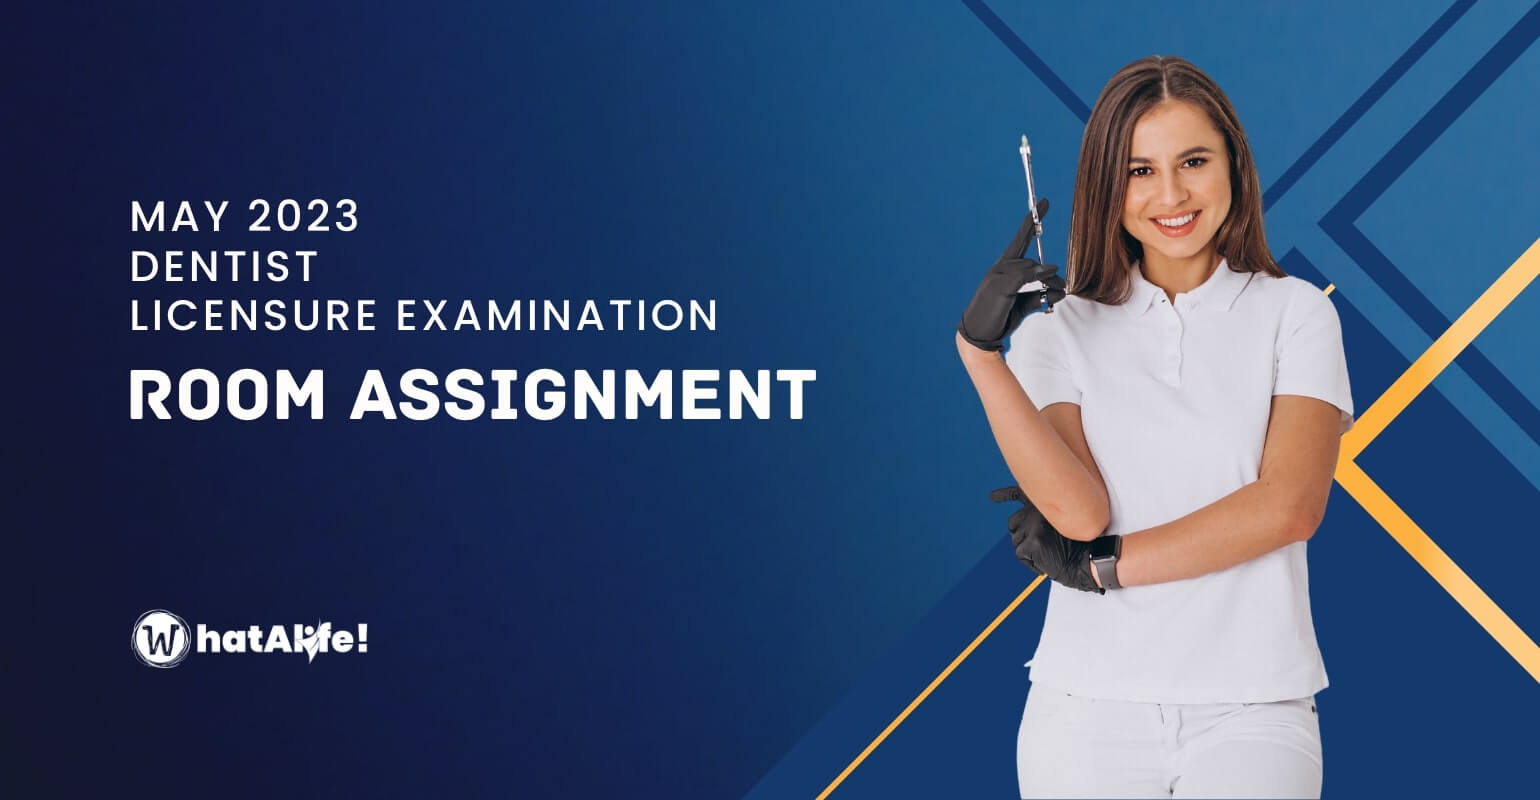 Room Assignment — May 2023 Dentist Licensure Exam